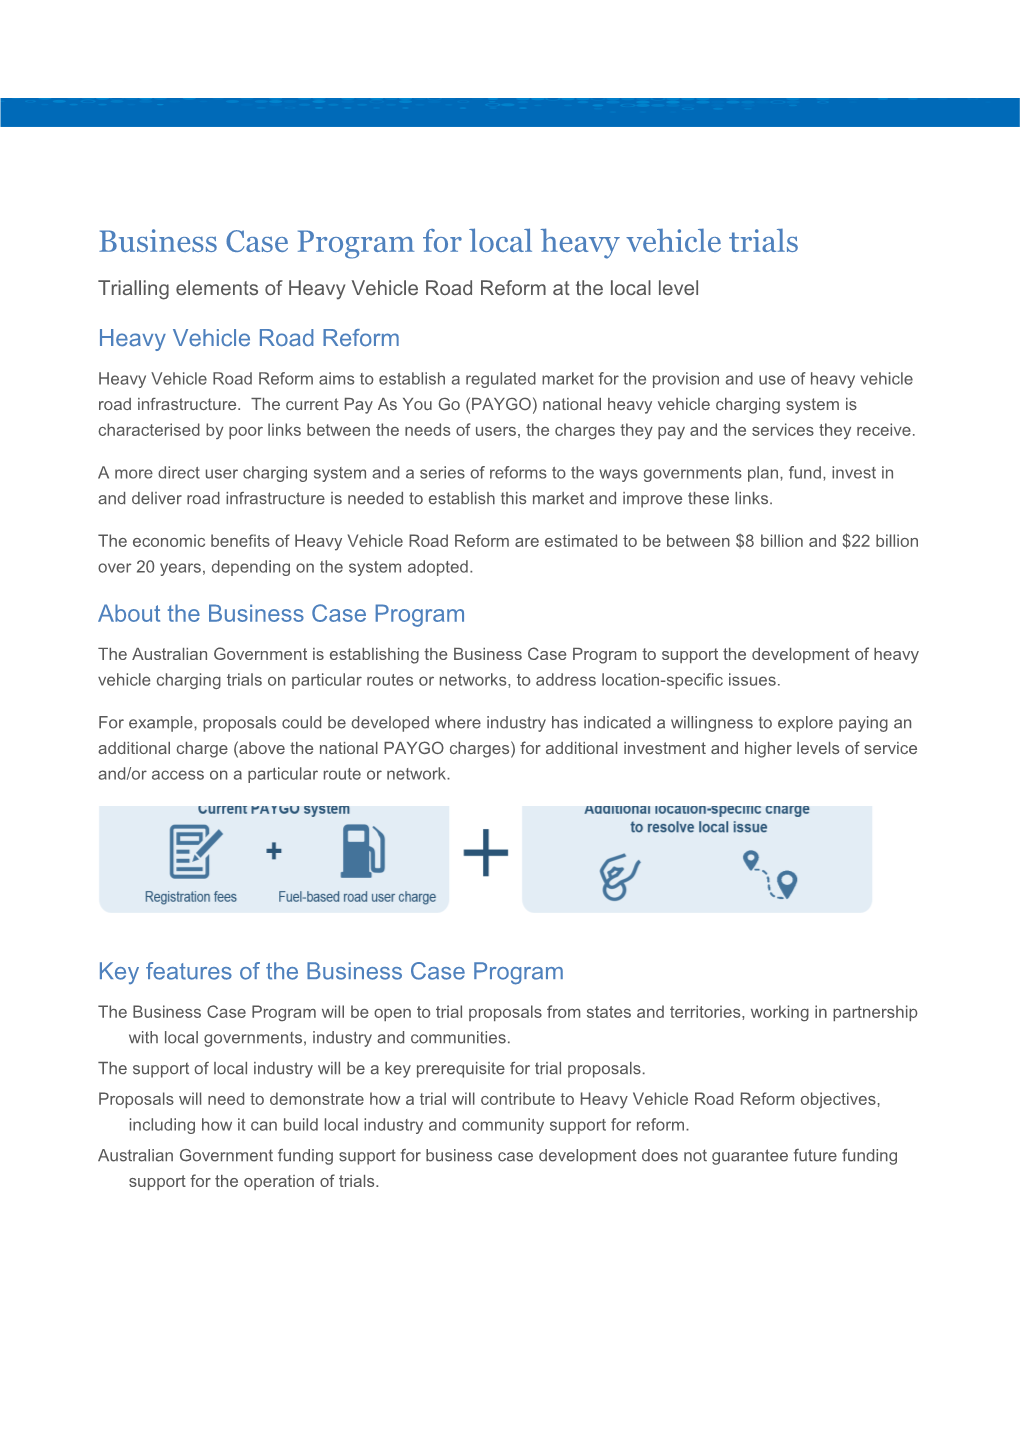 Business Case Program for Local Heavy Vehicle Trials